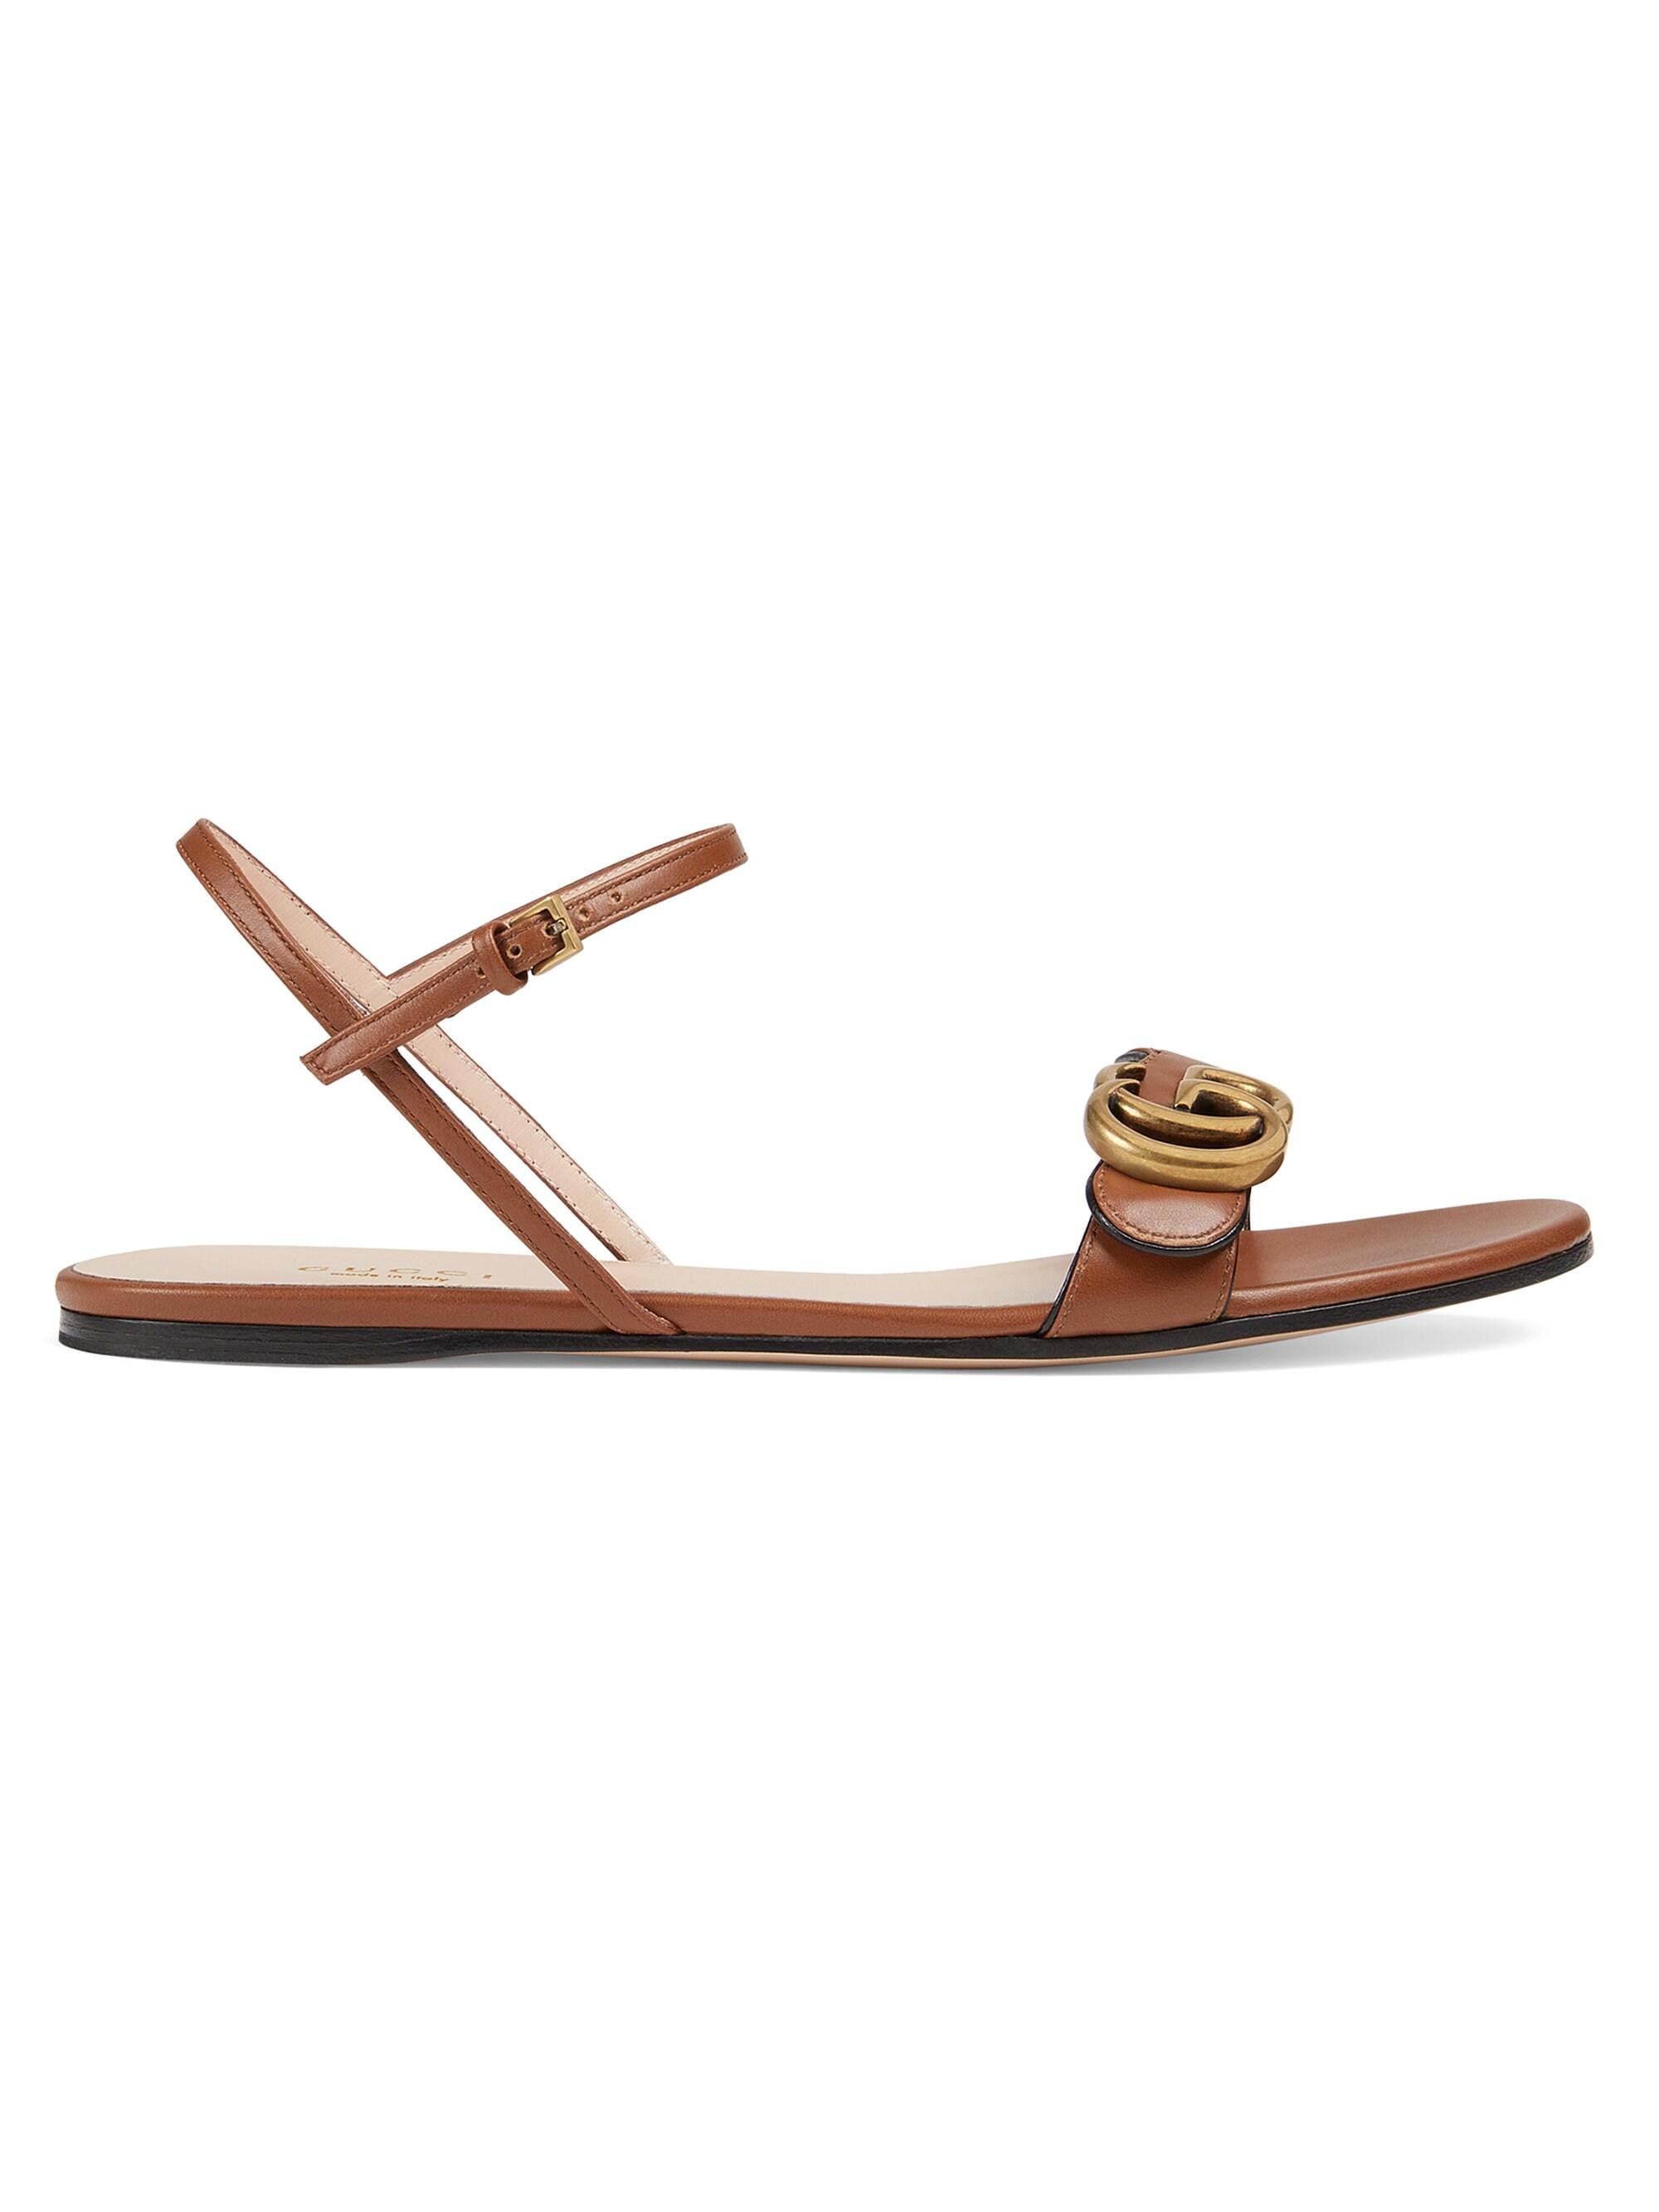 Gucci Marmont Leather Double G Sandals Bordeaux in Brown | Lyst